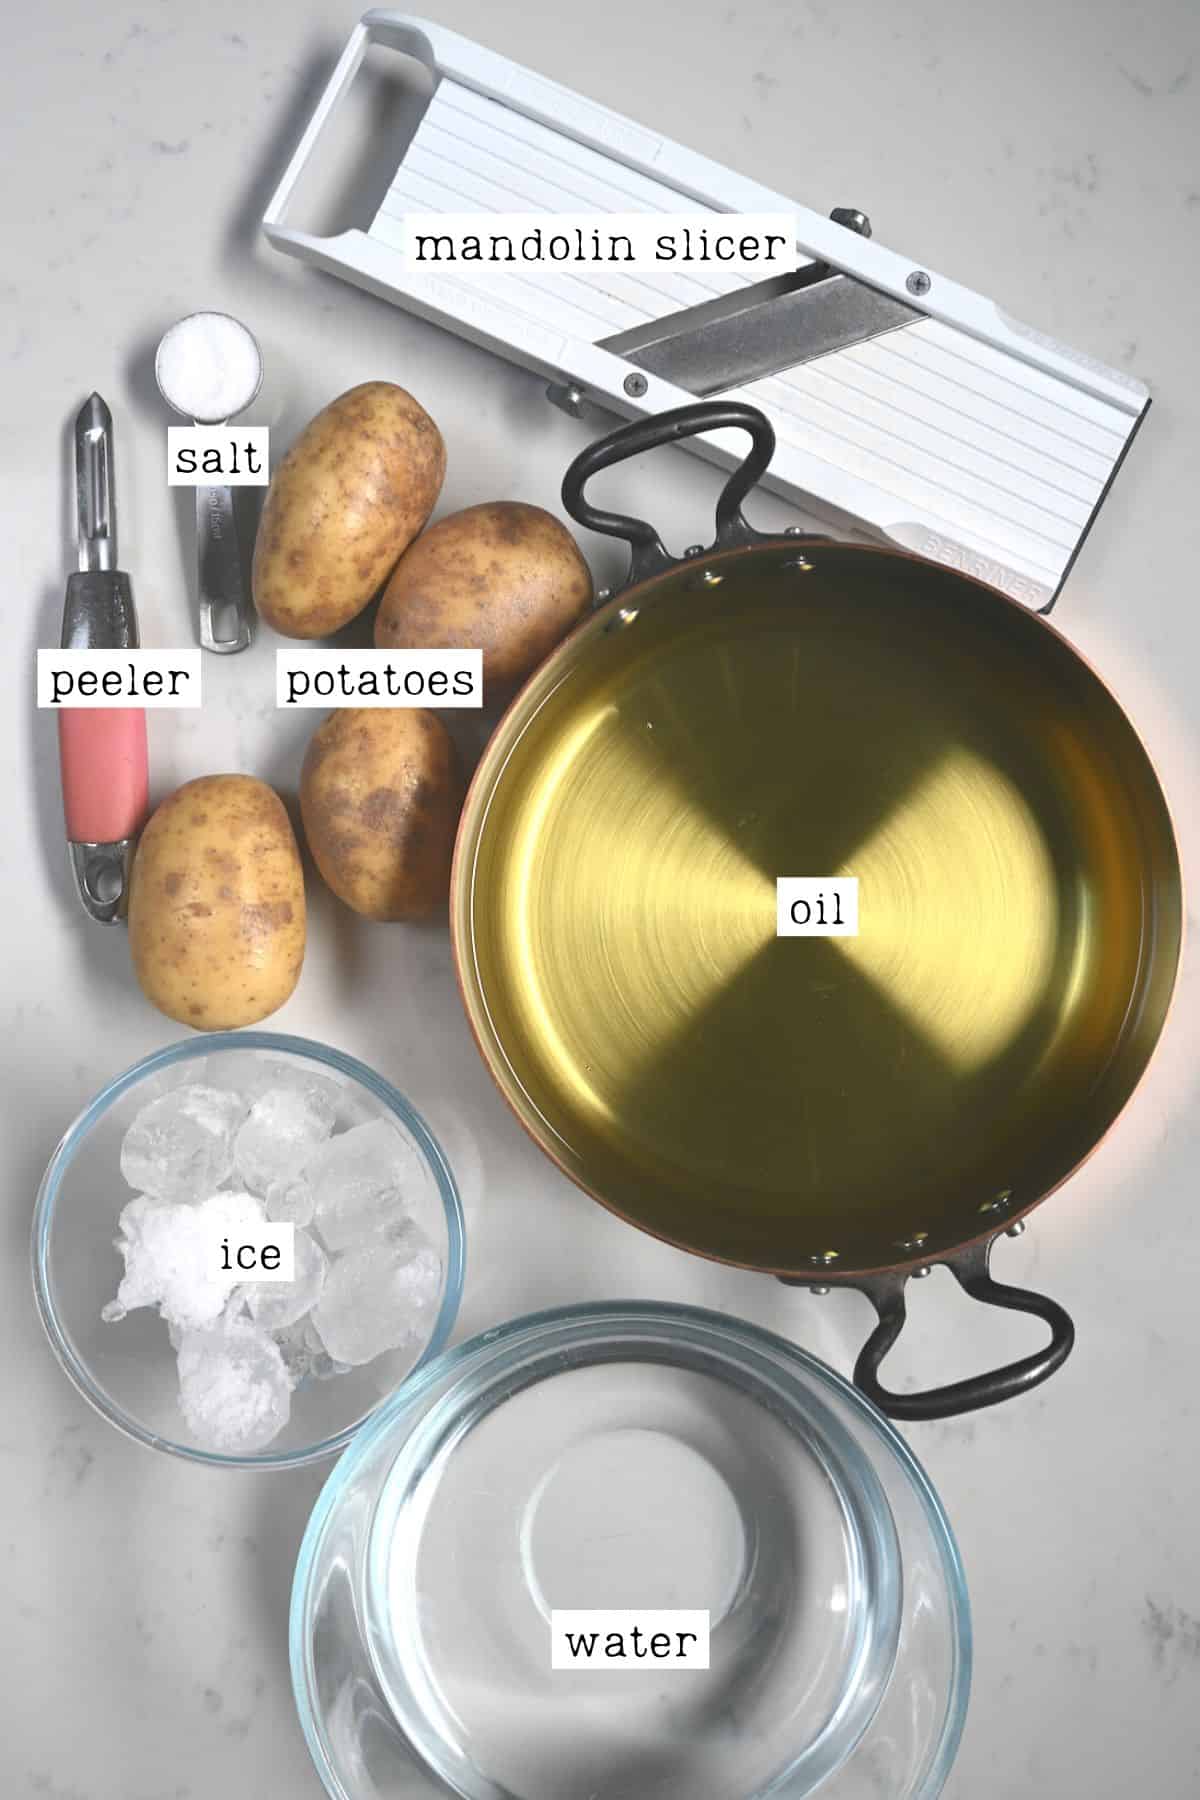 Ingredients and tools needed for homemade chips